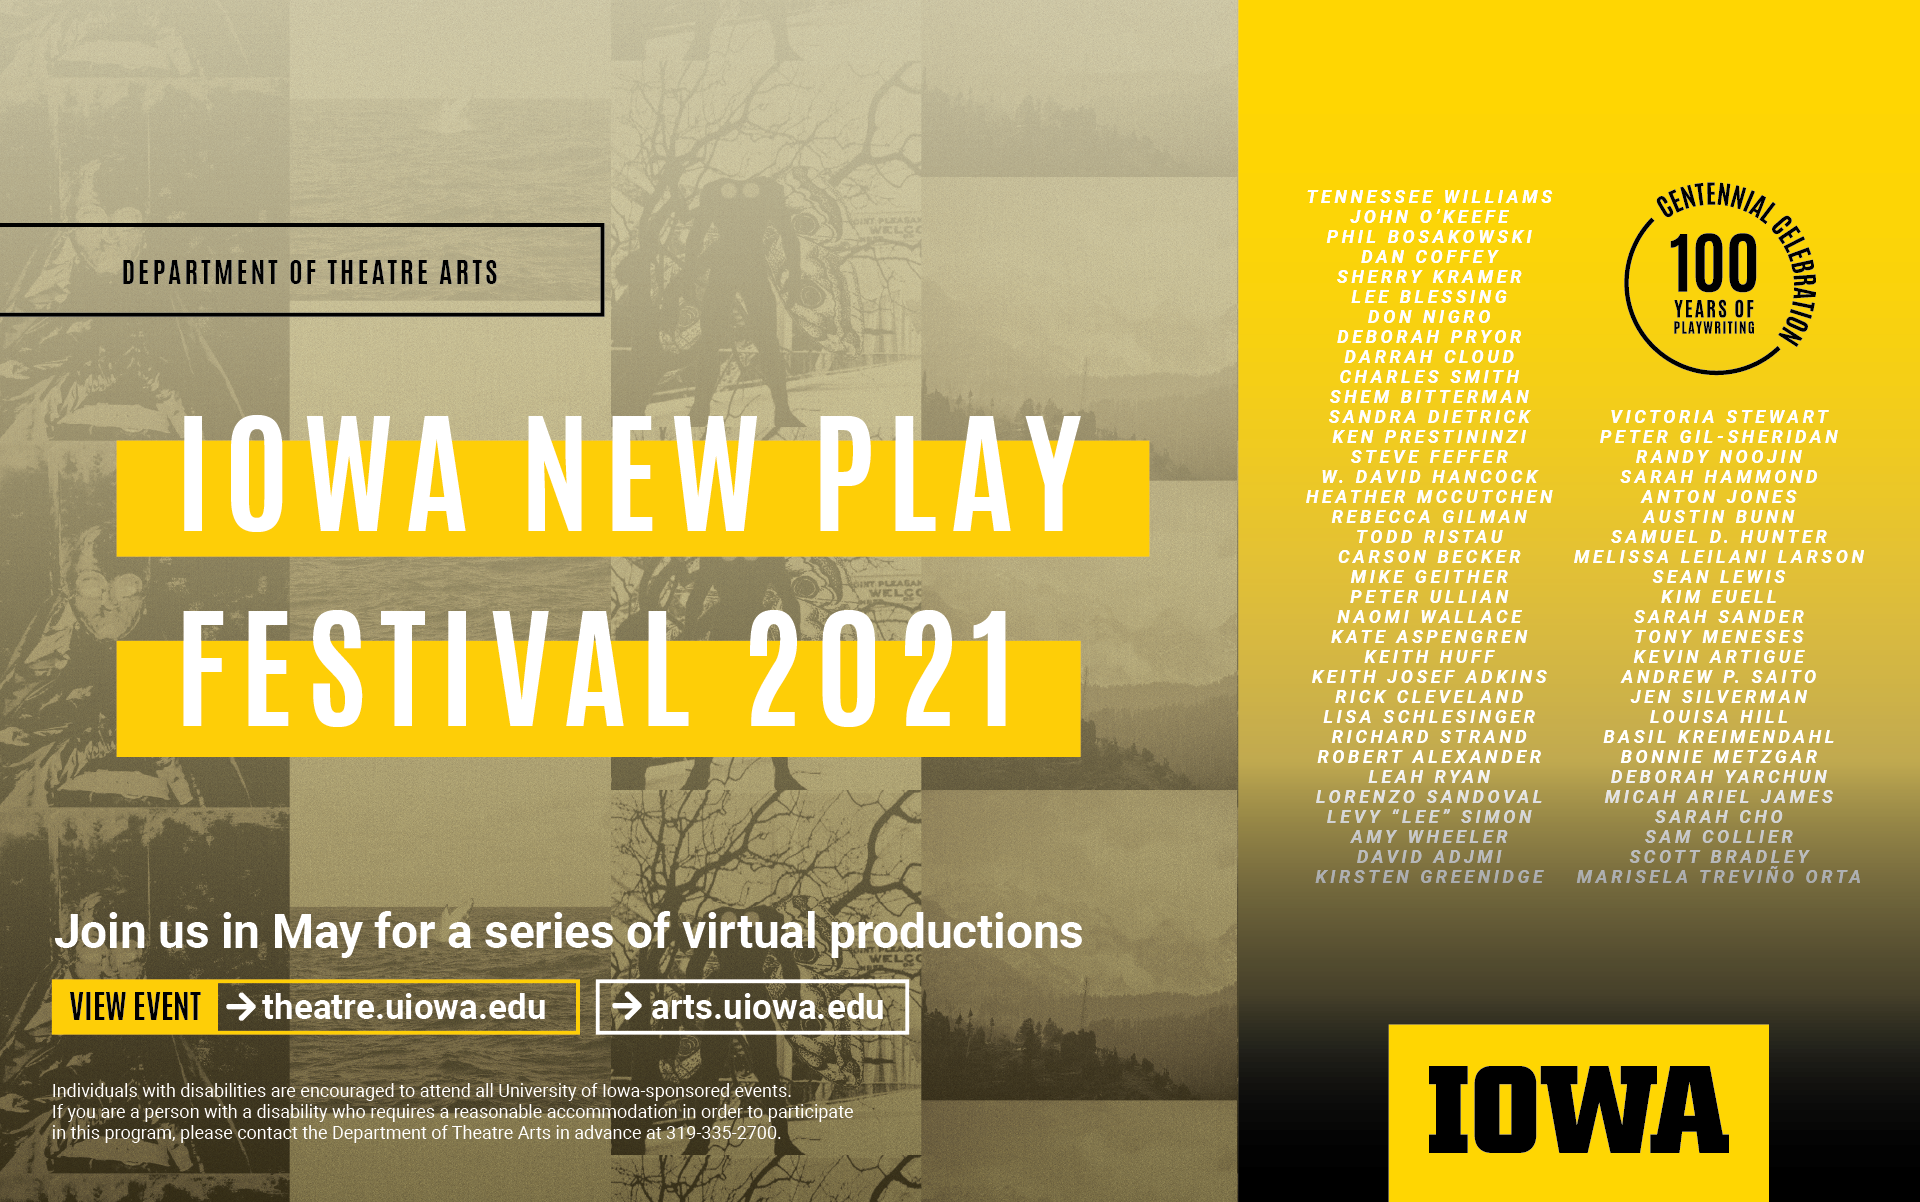 Iowa New Play Festival. Join us in May for a series of virtual productions. View event: theatre.uiowa.edu. Photo collage and list of playwrights.